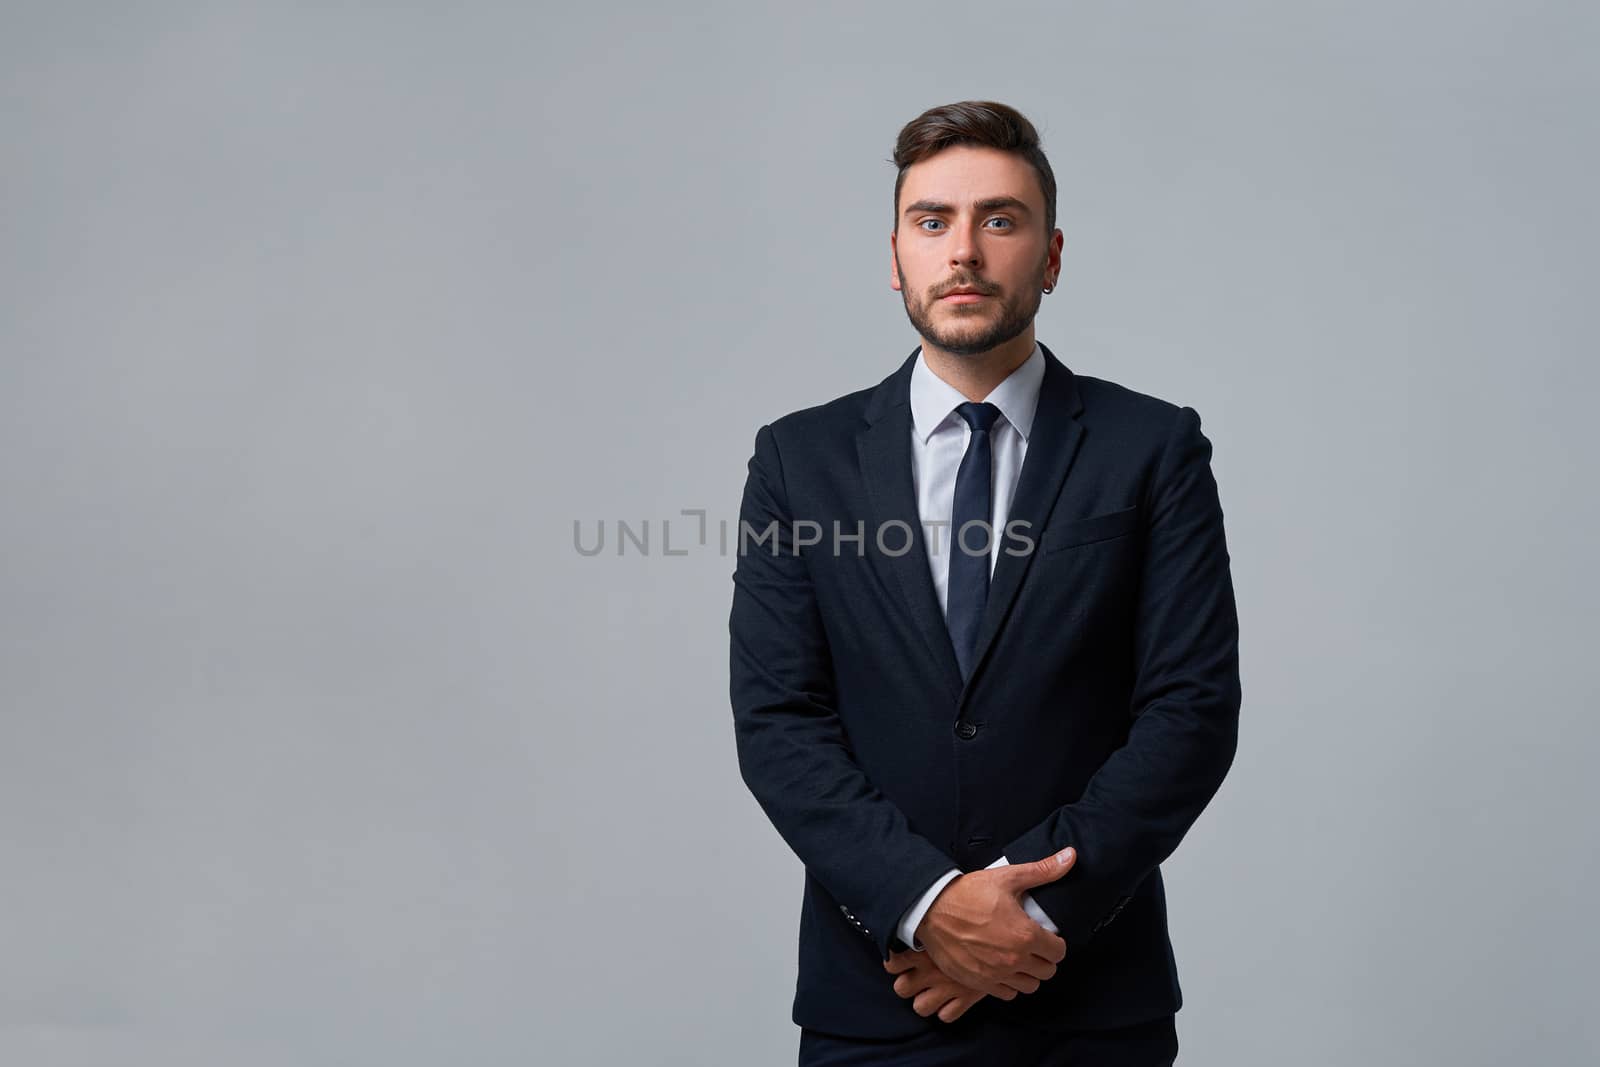 Businessman Business person. Man business suit studio gray background. Modern millenial person stylish haircut earring in ear. Portrait of charming successful young entrepreneur